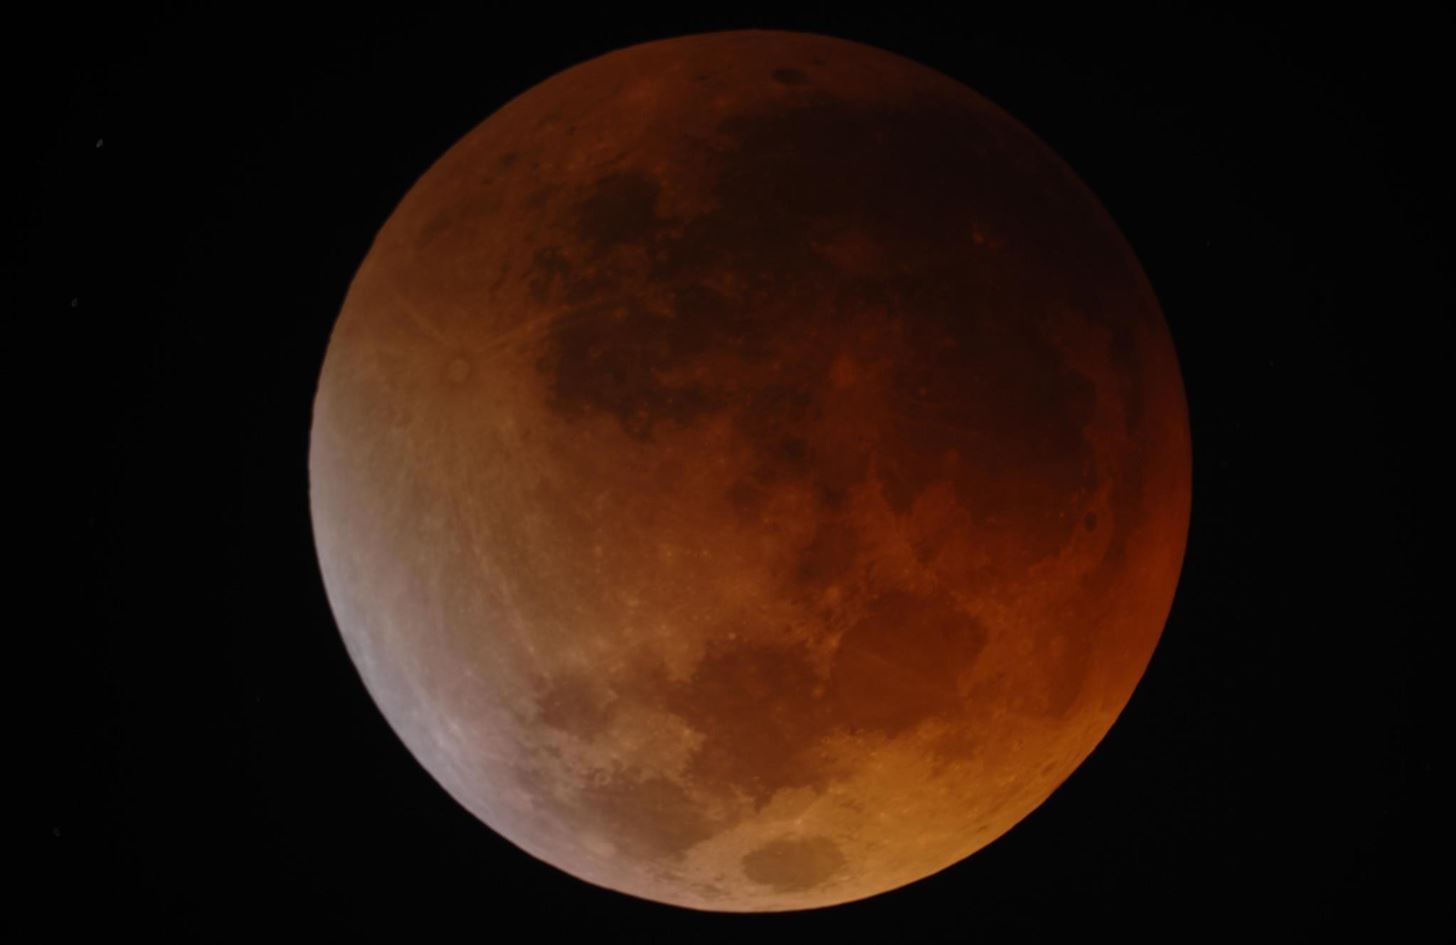 There's a Total Lunar Eclipse Monday Night—Here's How to Watch the "Blood Moon" Rising